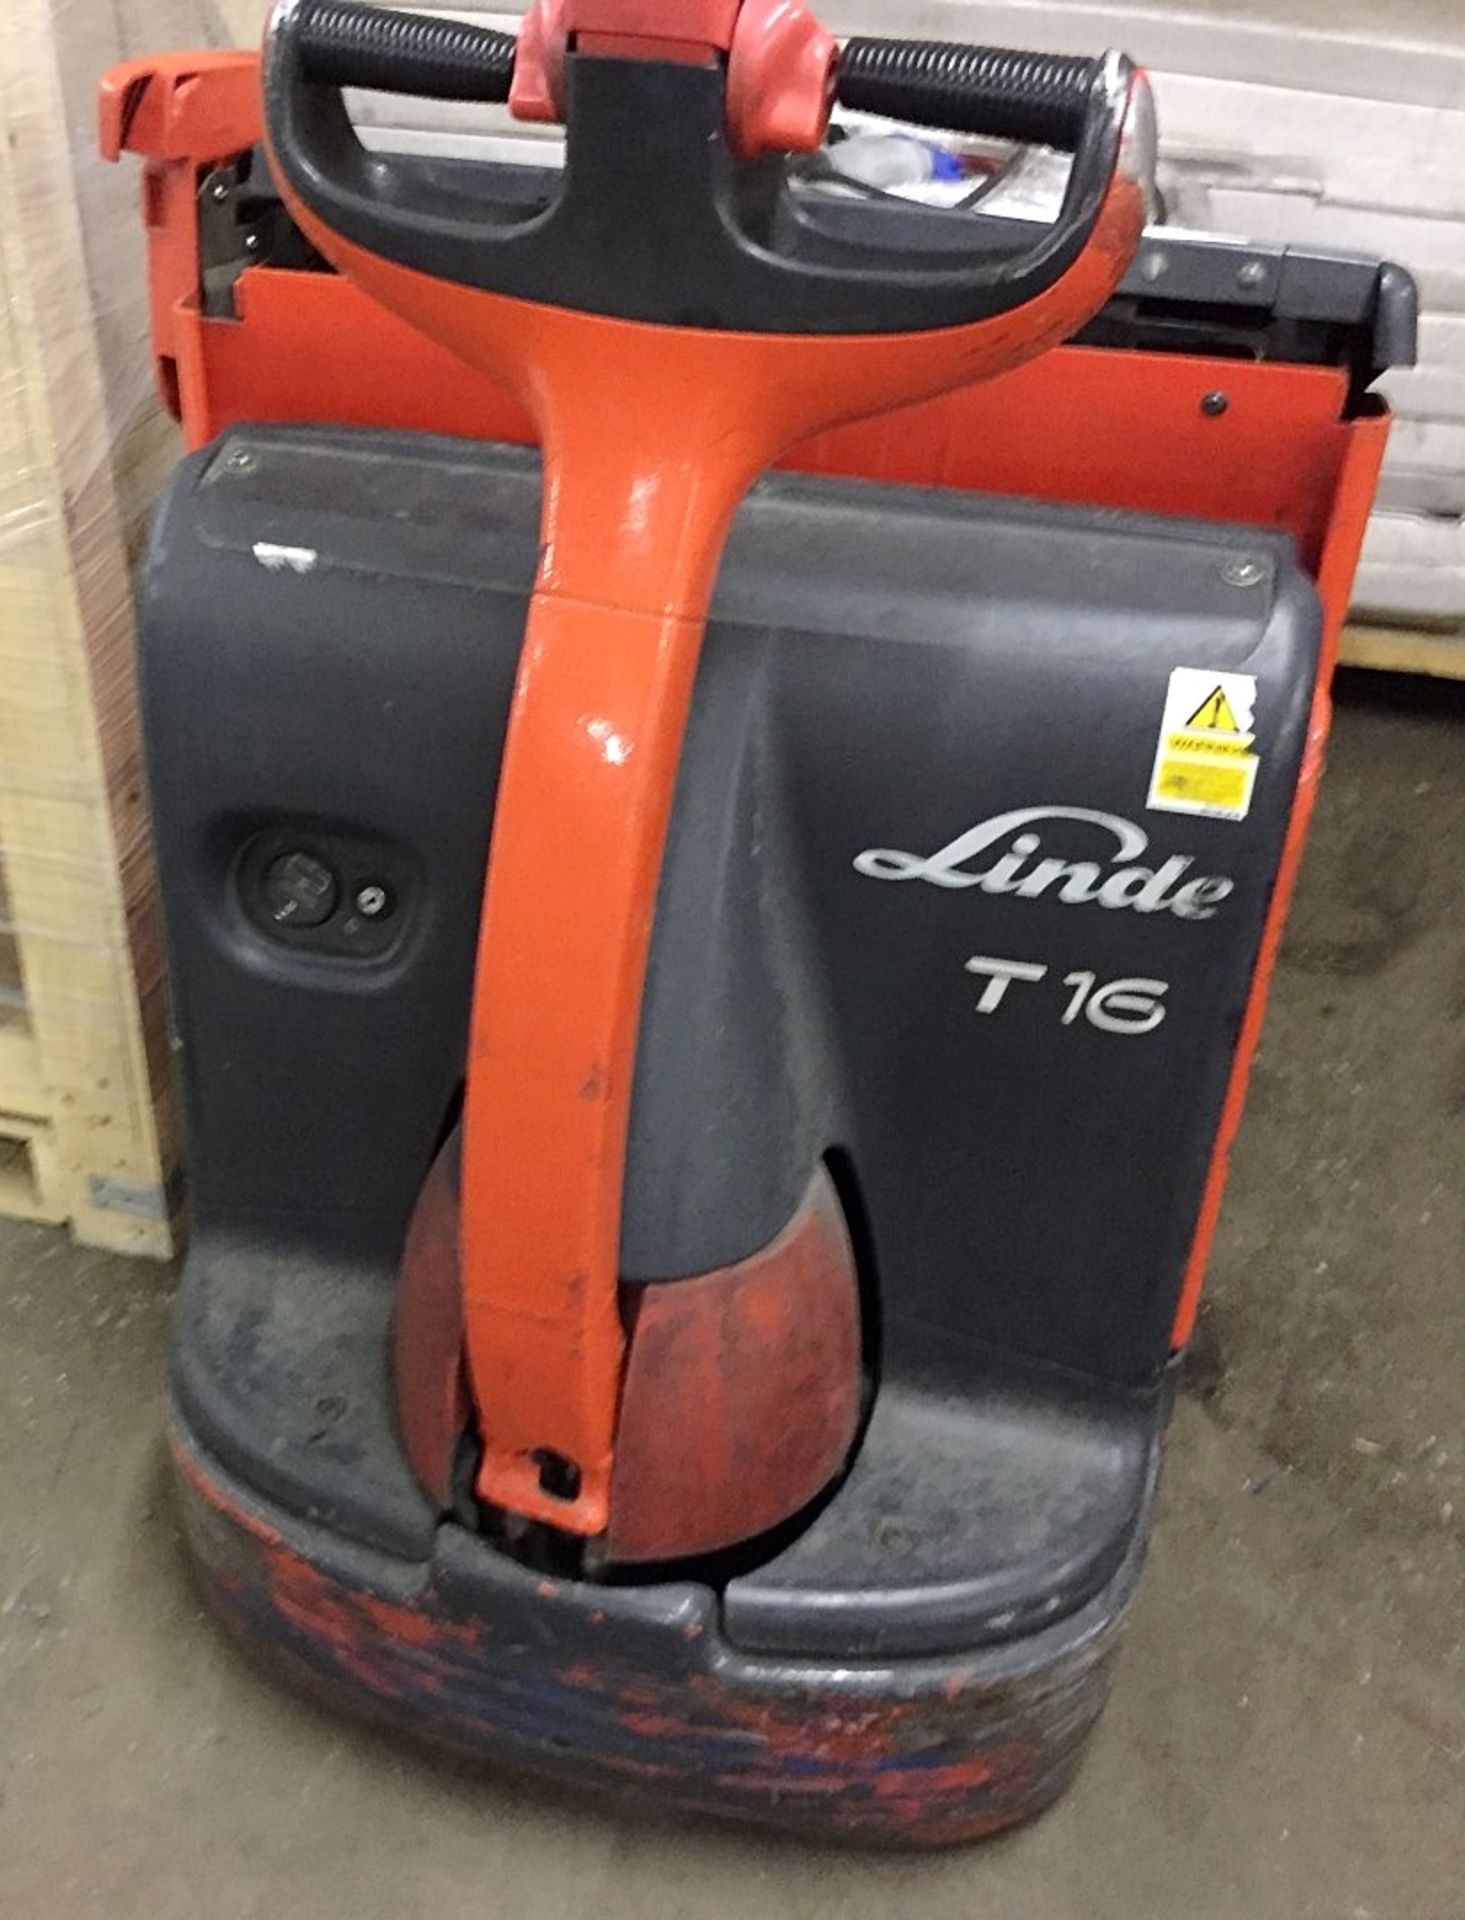 1 x Linde T16 Electric Pallet Truck - 1600kg Capacity - Tested and Working - Key and Charger - Image 3 of 3